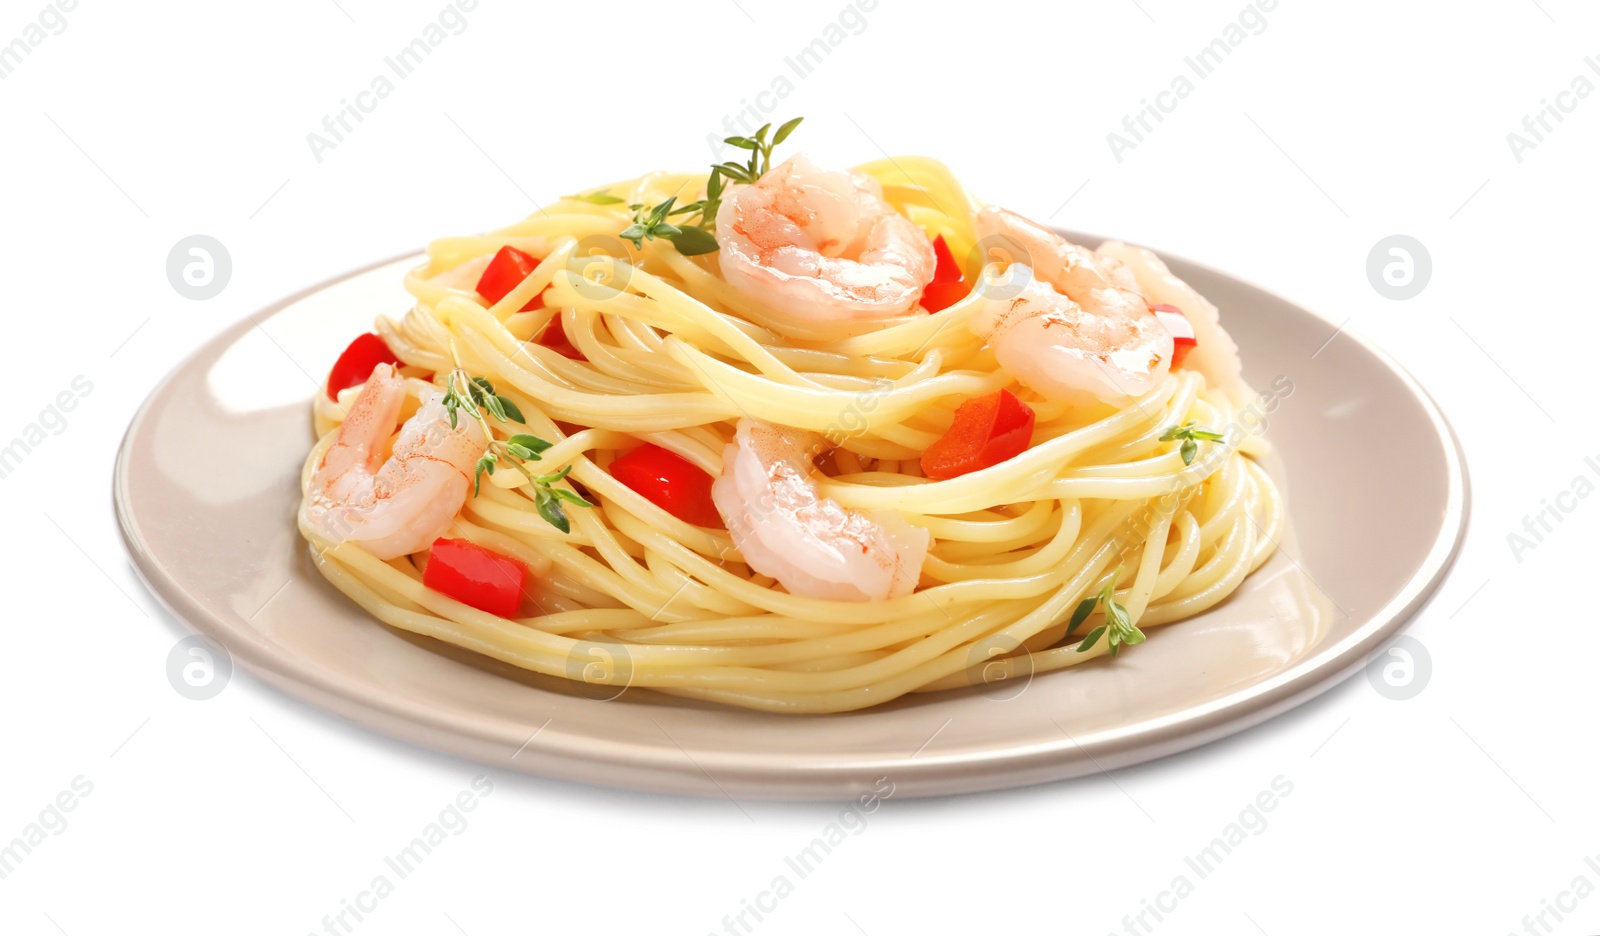 Photo of Plate with spaghetti and shrimps on white background